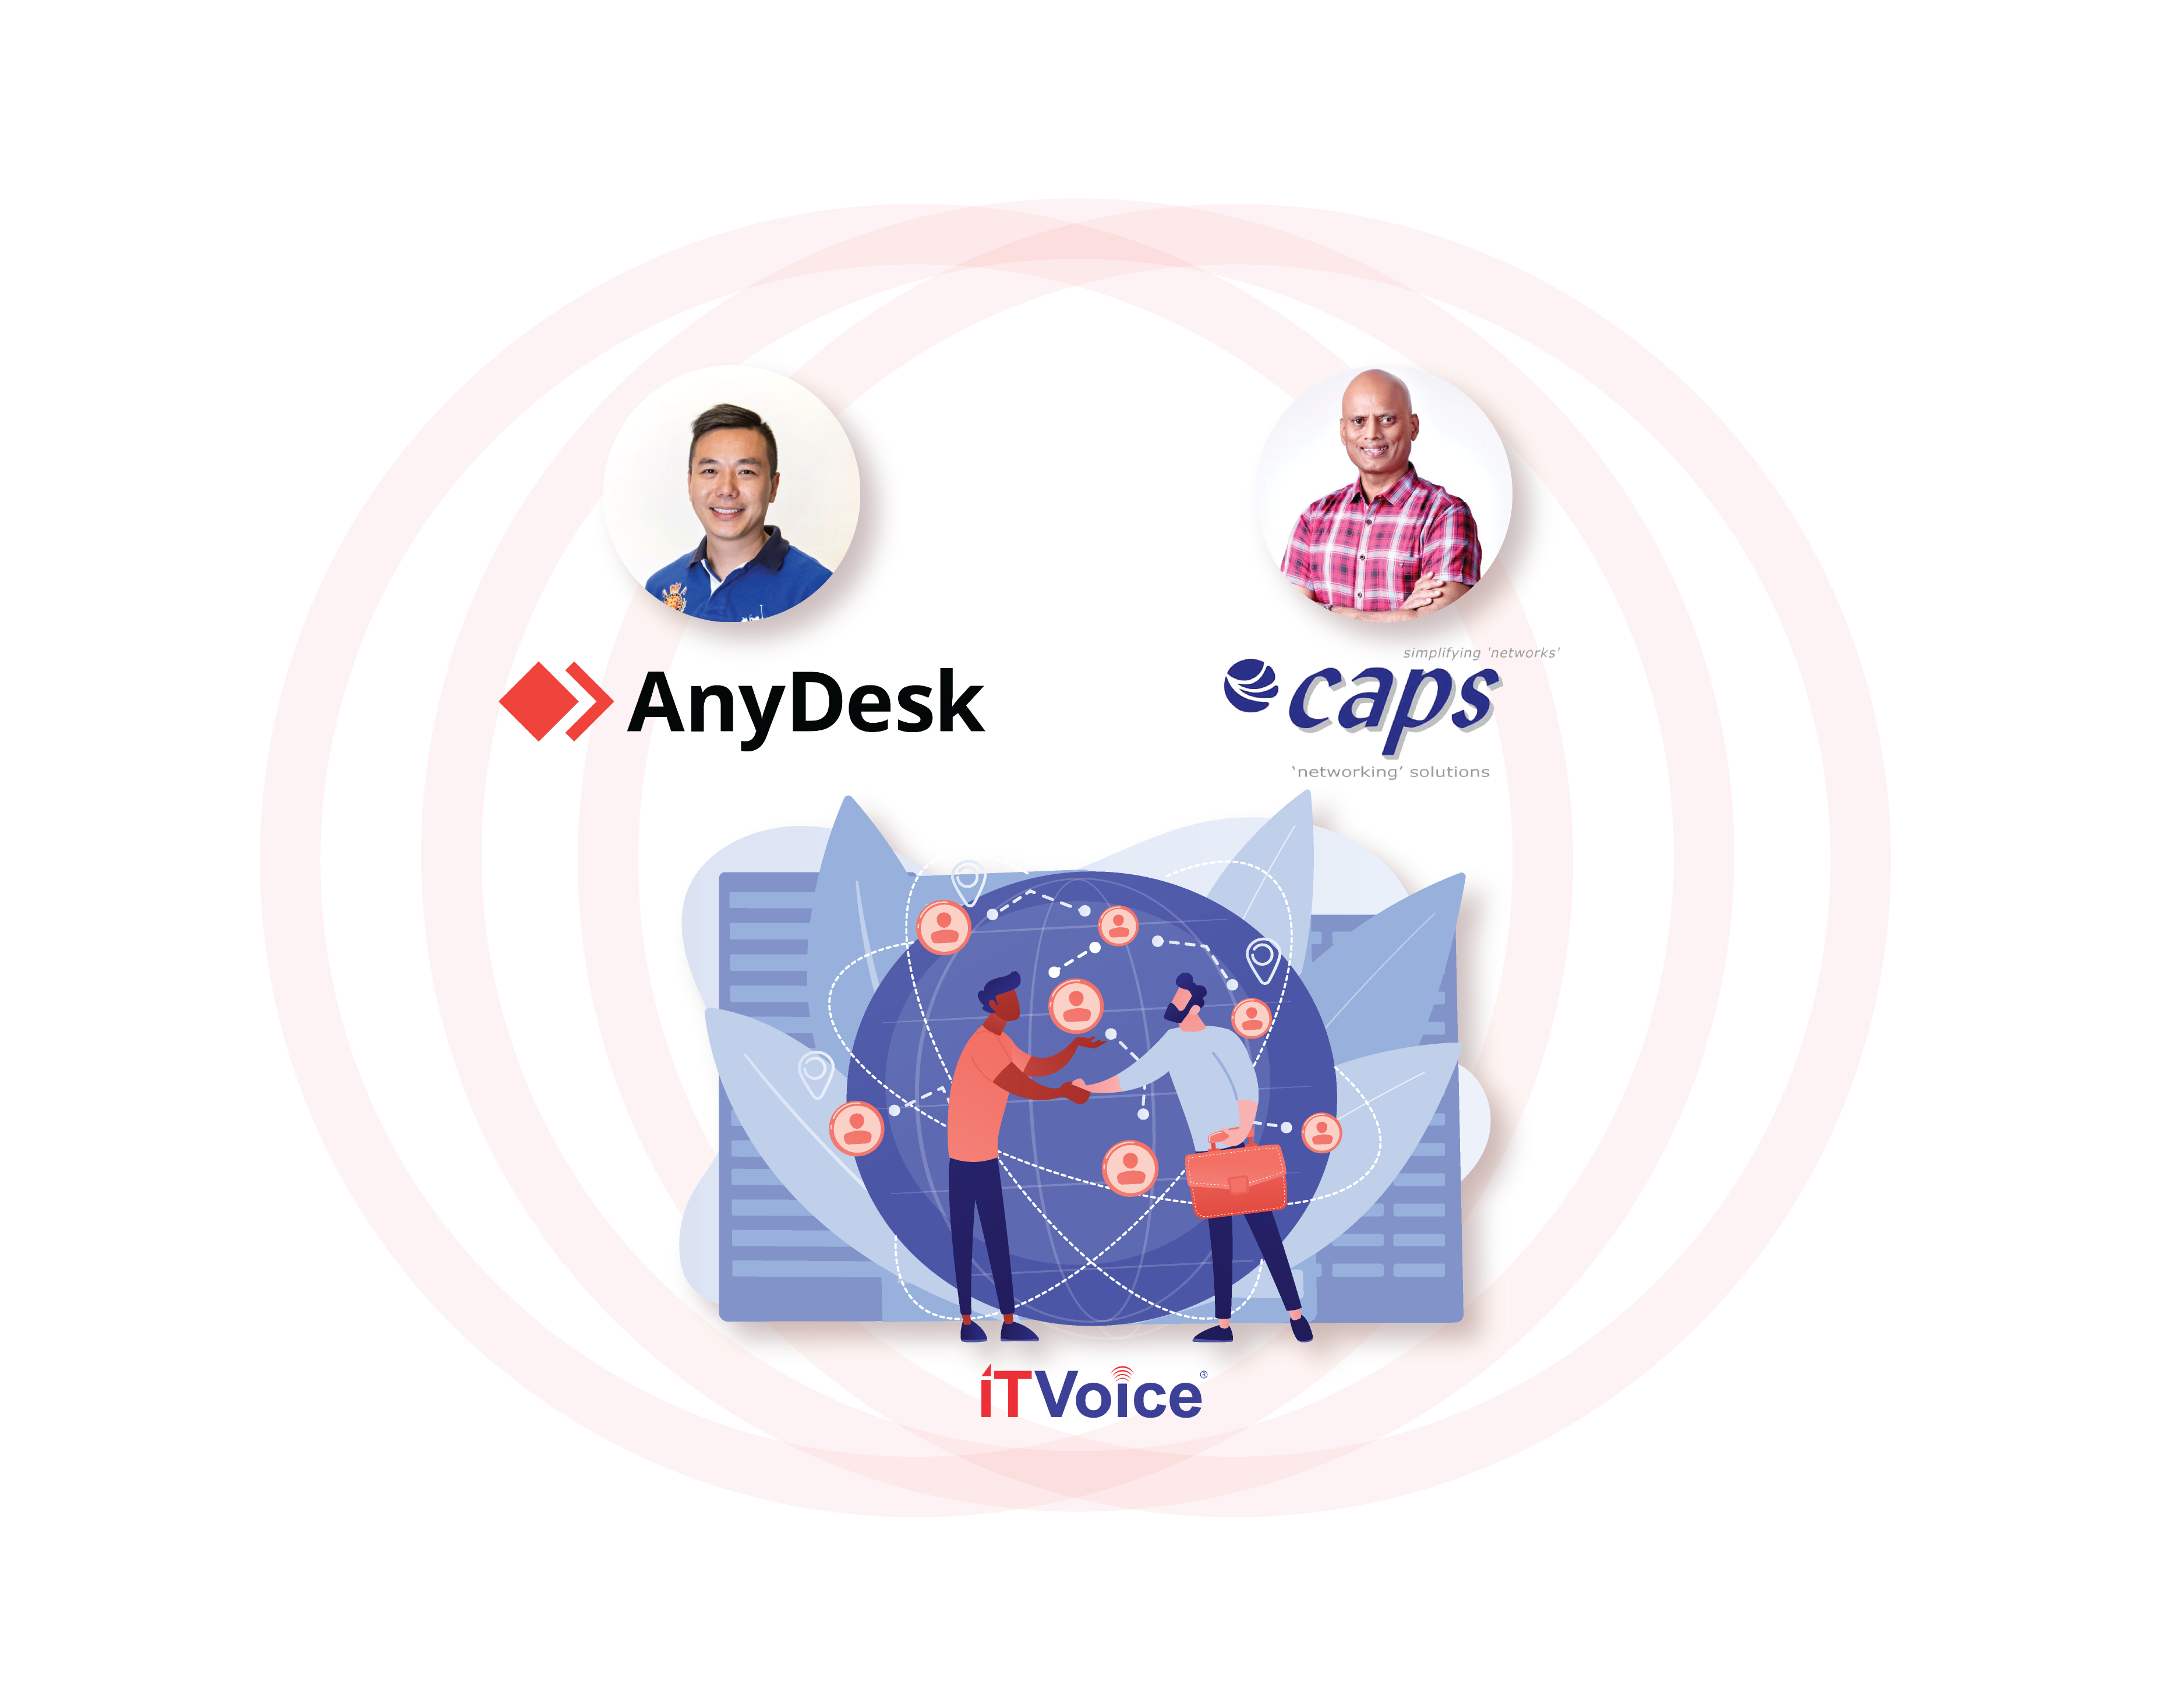 eCaps has been designated as a Value Added Distributor for Anydesk in India/SAARC